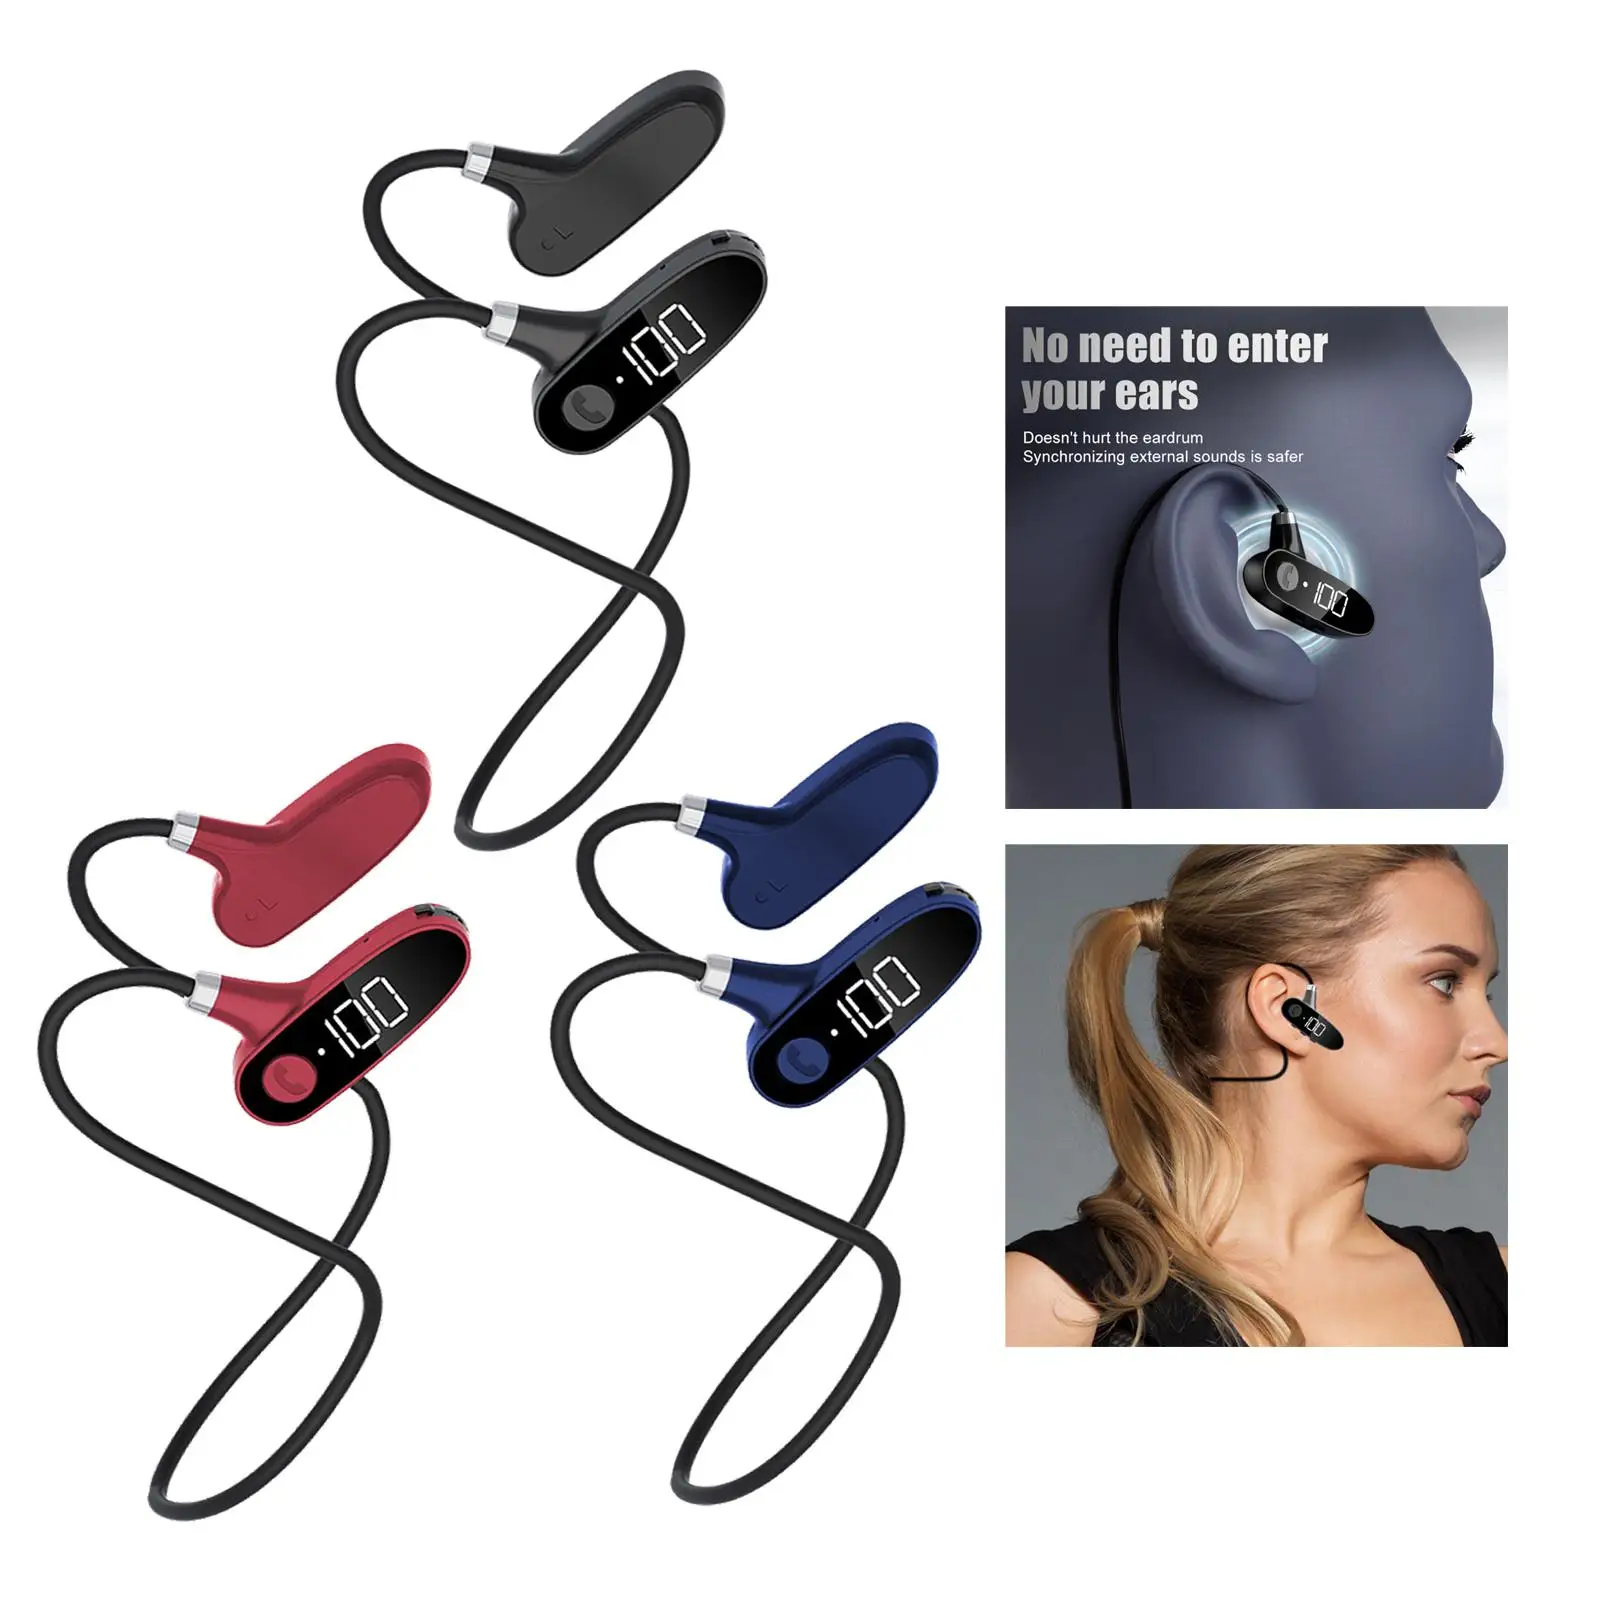  Conduction  5.2 Headphones Headsets Built-in Mic for Swimming Workouts